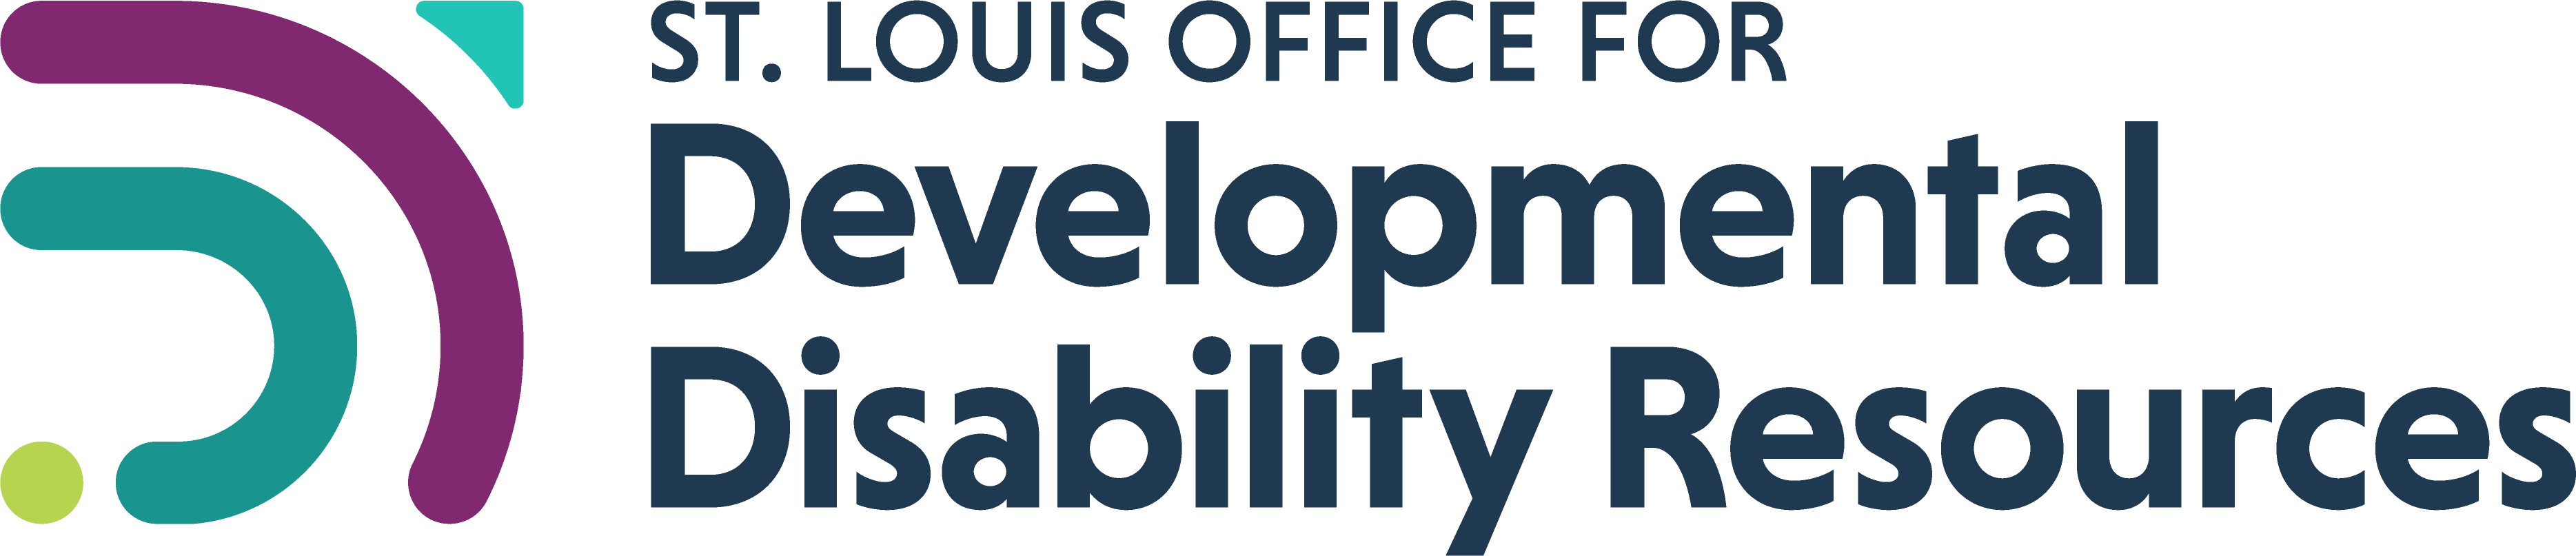 St. Louis Office for developmental disability resources